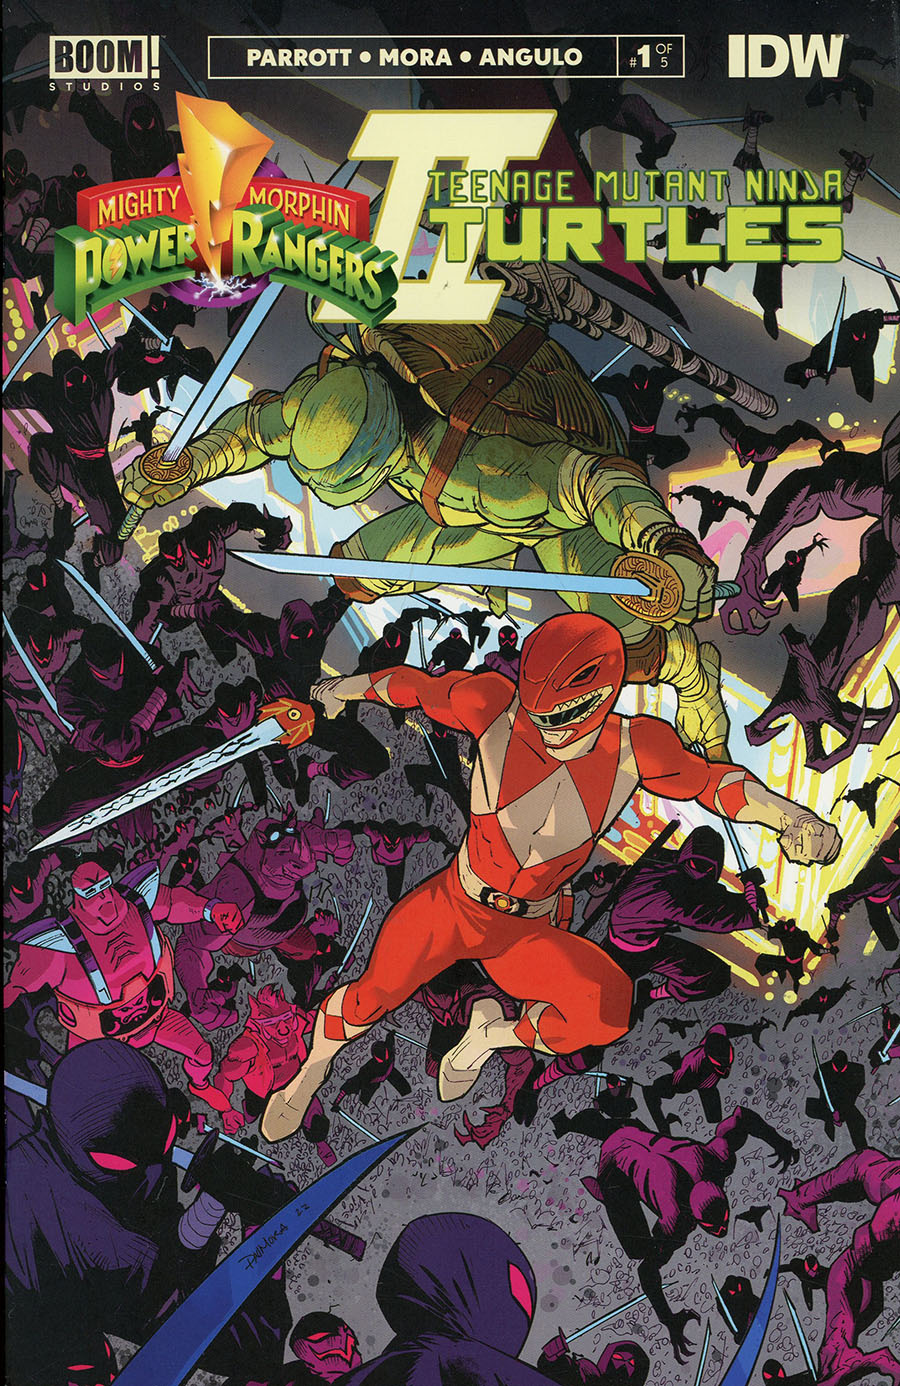 Super Turtles #1 cover dustjacket, --Updated with new scan,…